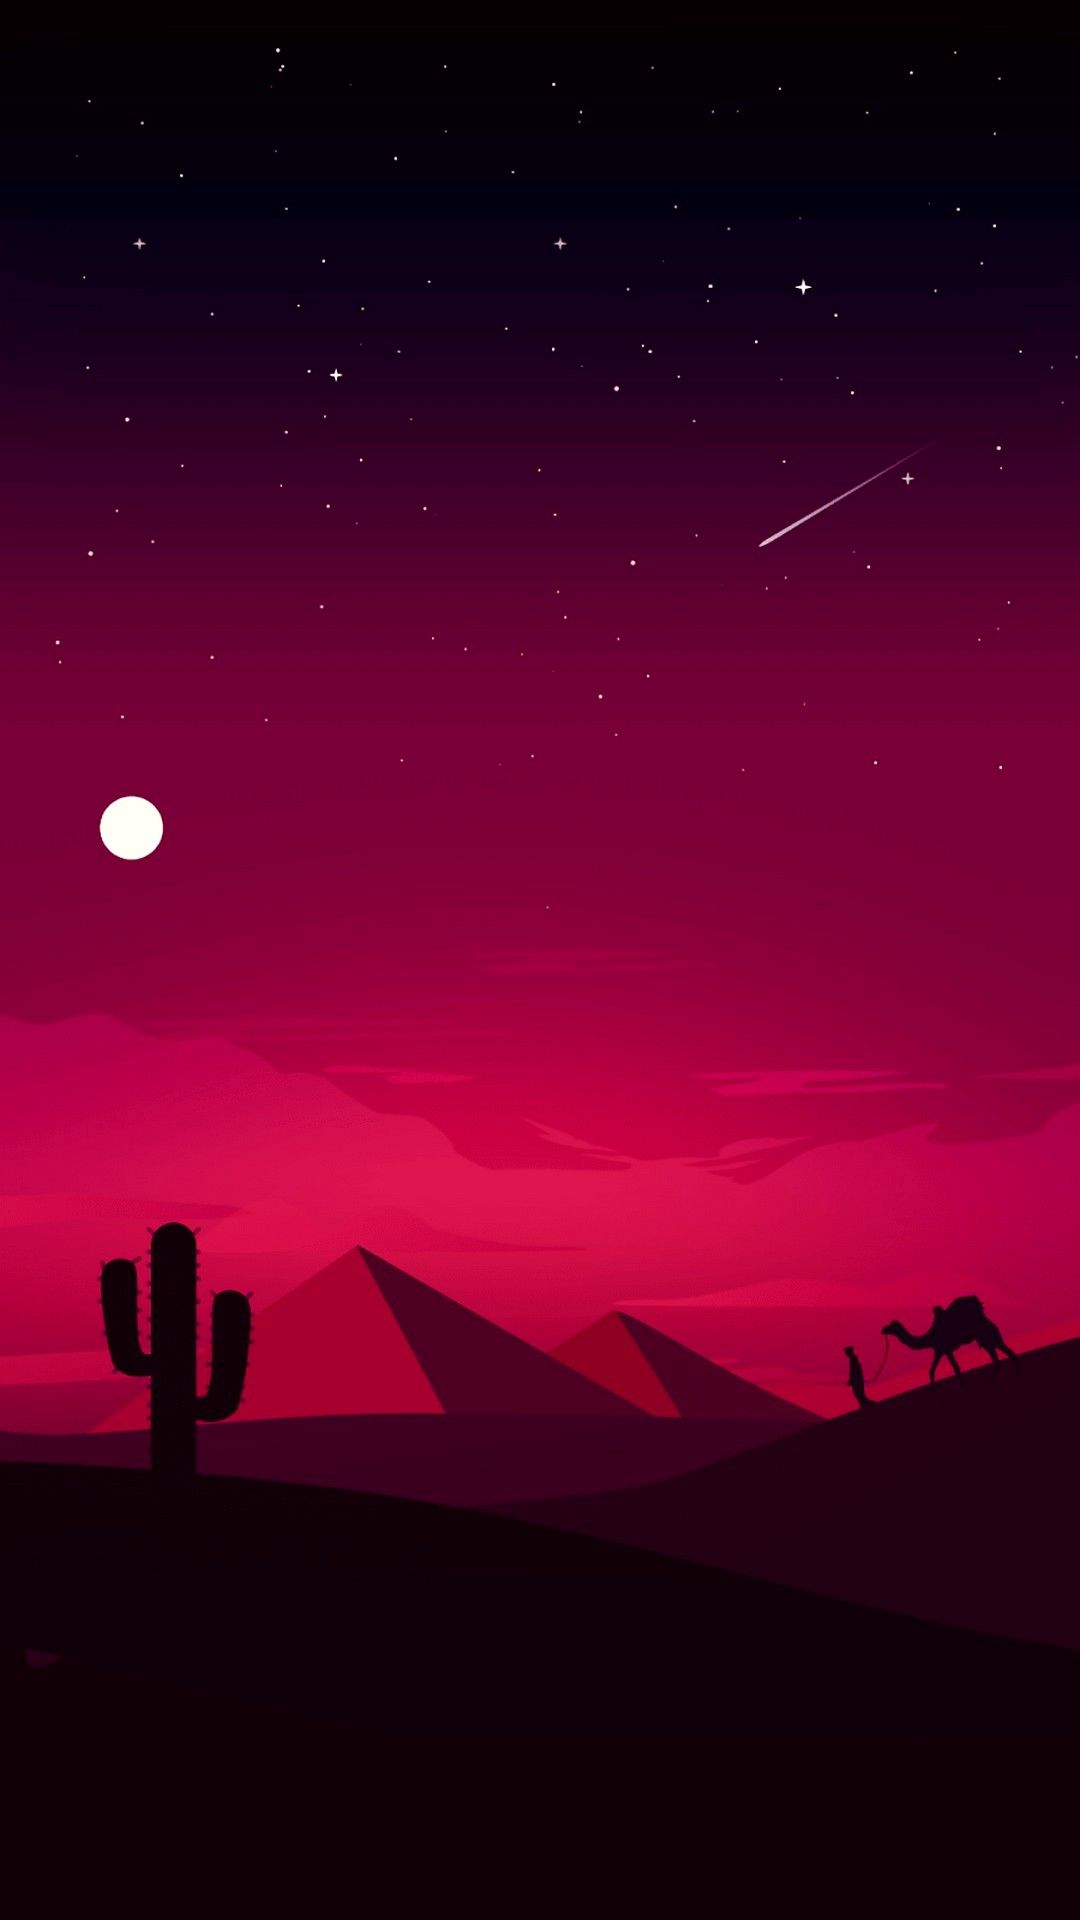 A desert scene with stars in the sky - IPhone